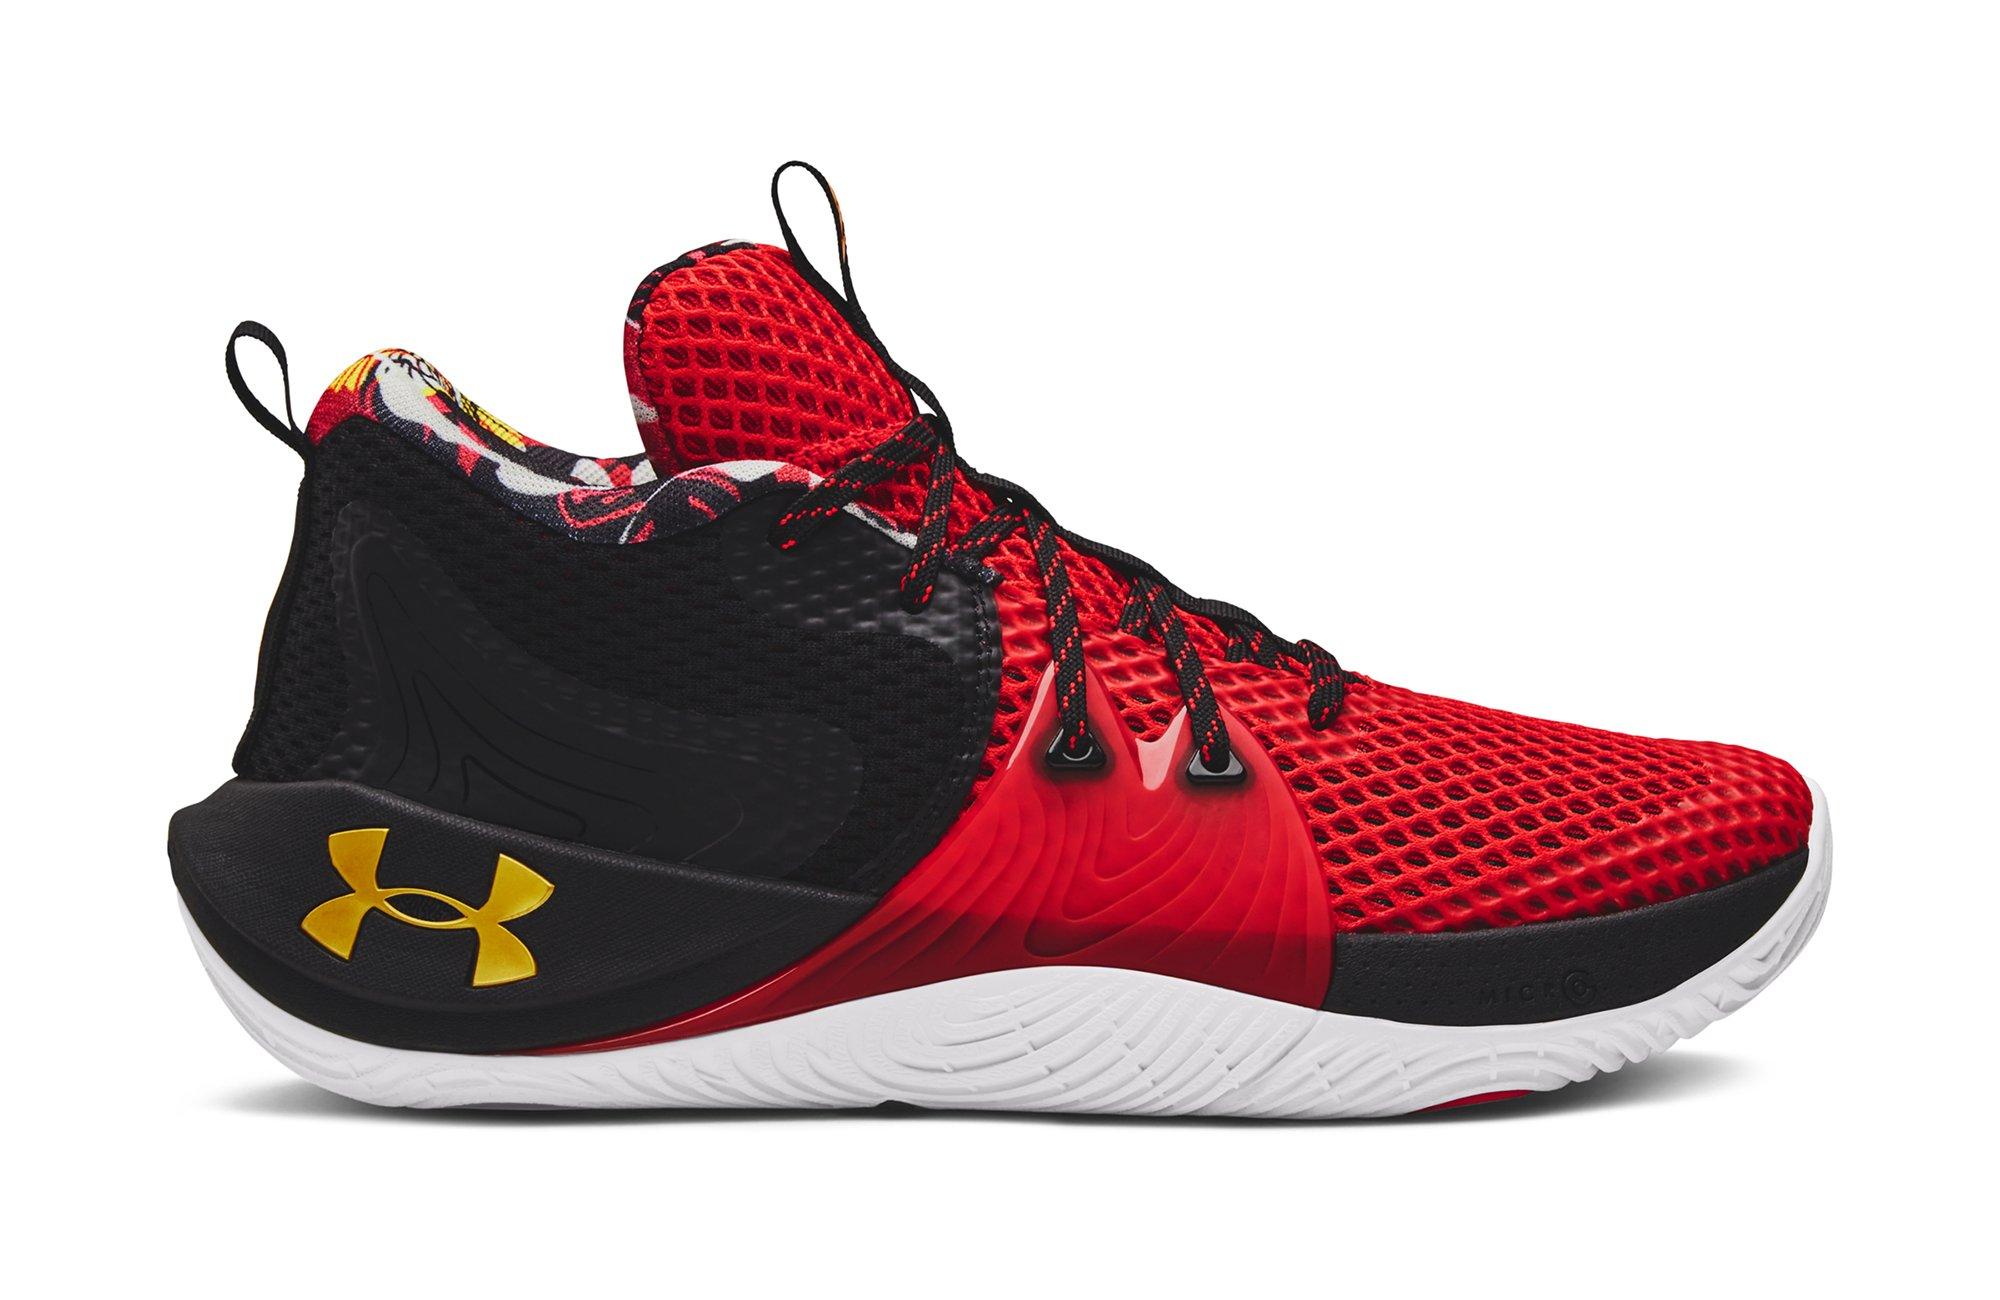 Sneakers Release – Under Armour Curry 7 “Chinese New